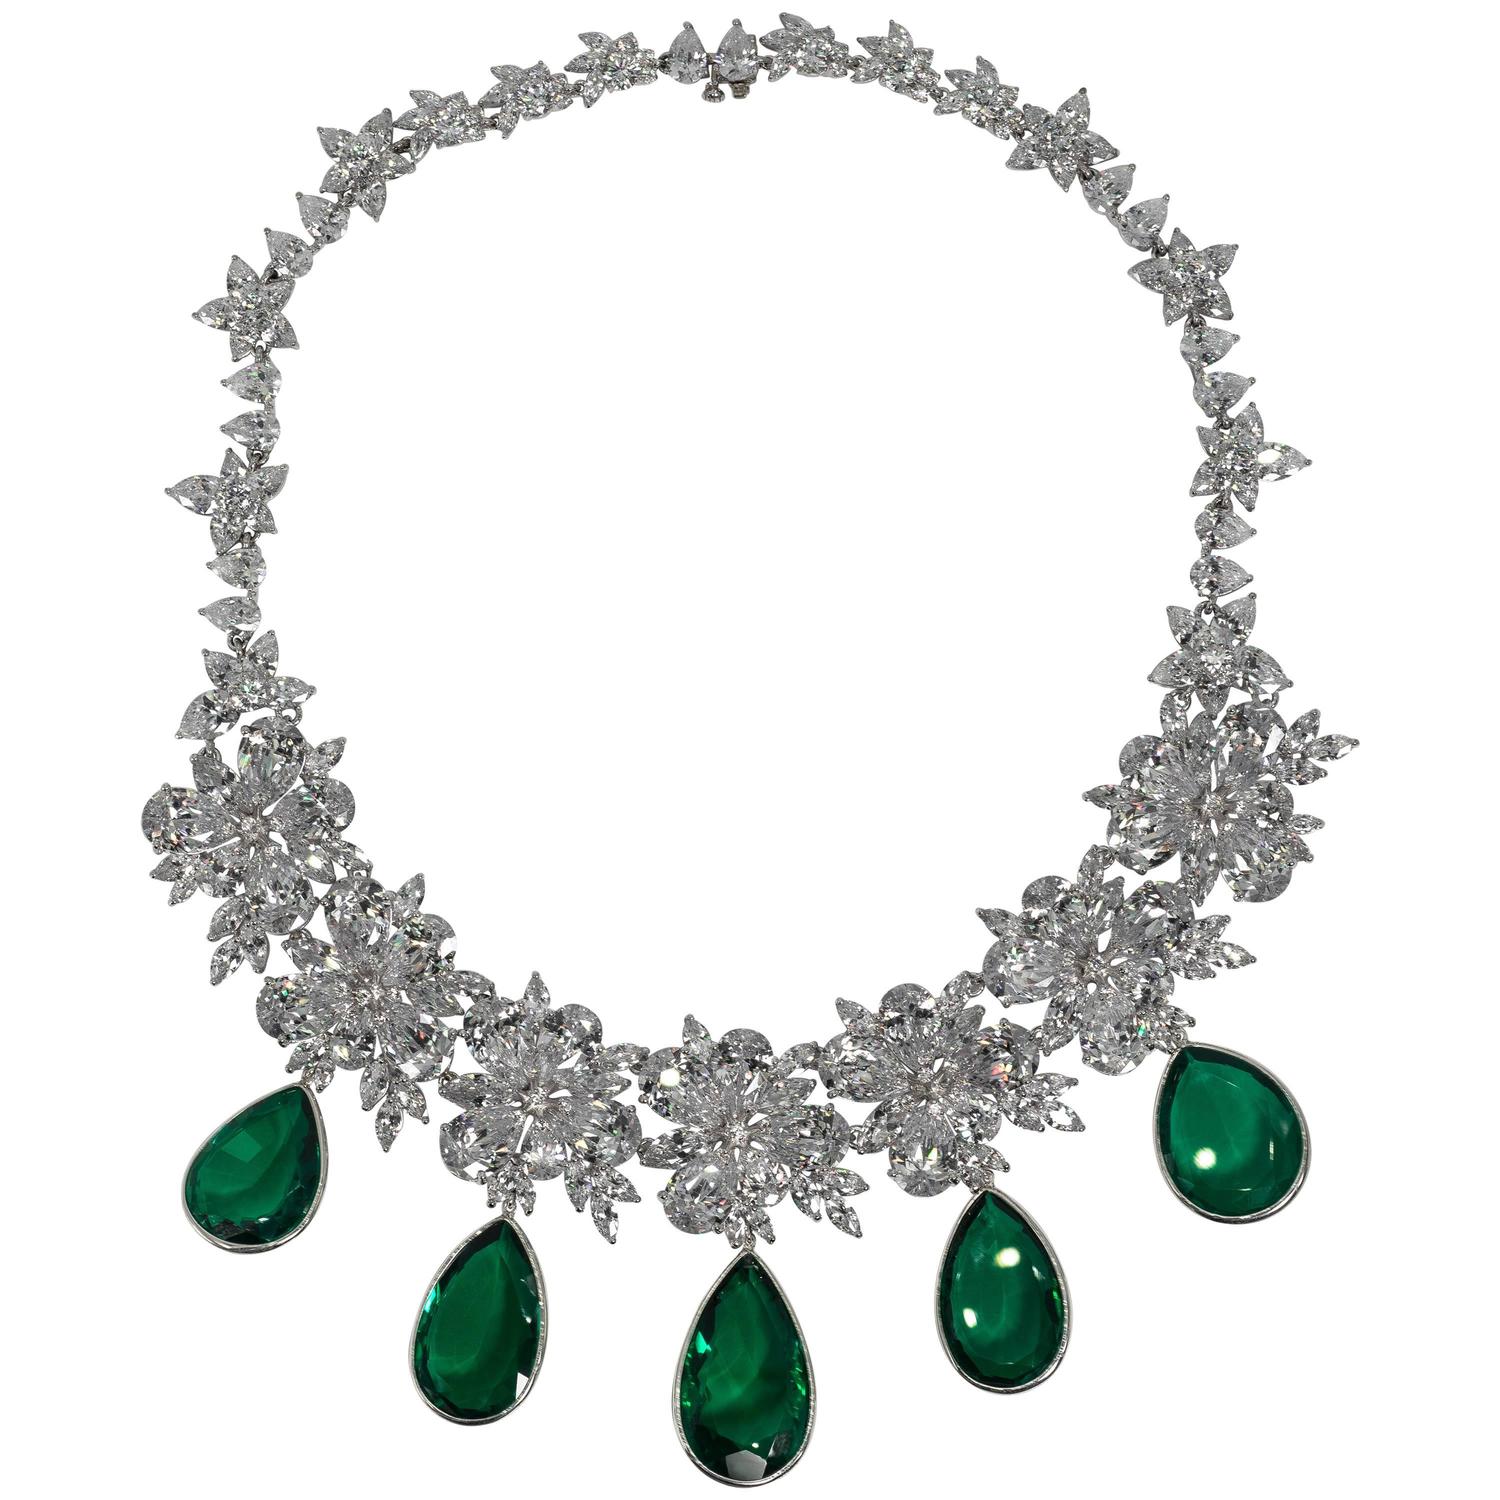 Maharajah Jewel Collection Amazing Faux Diamond Emerald Necklace For ...